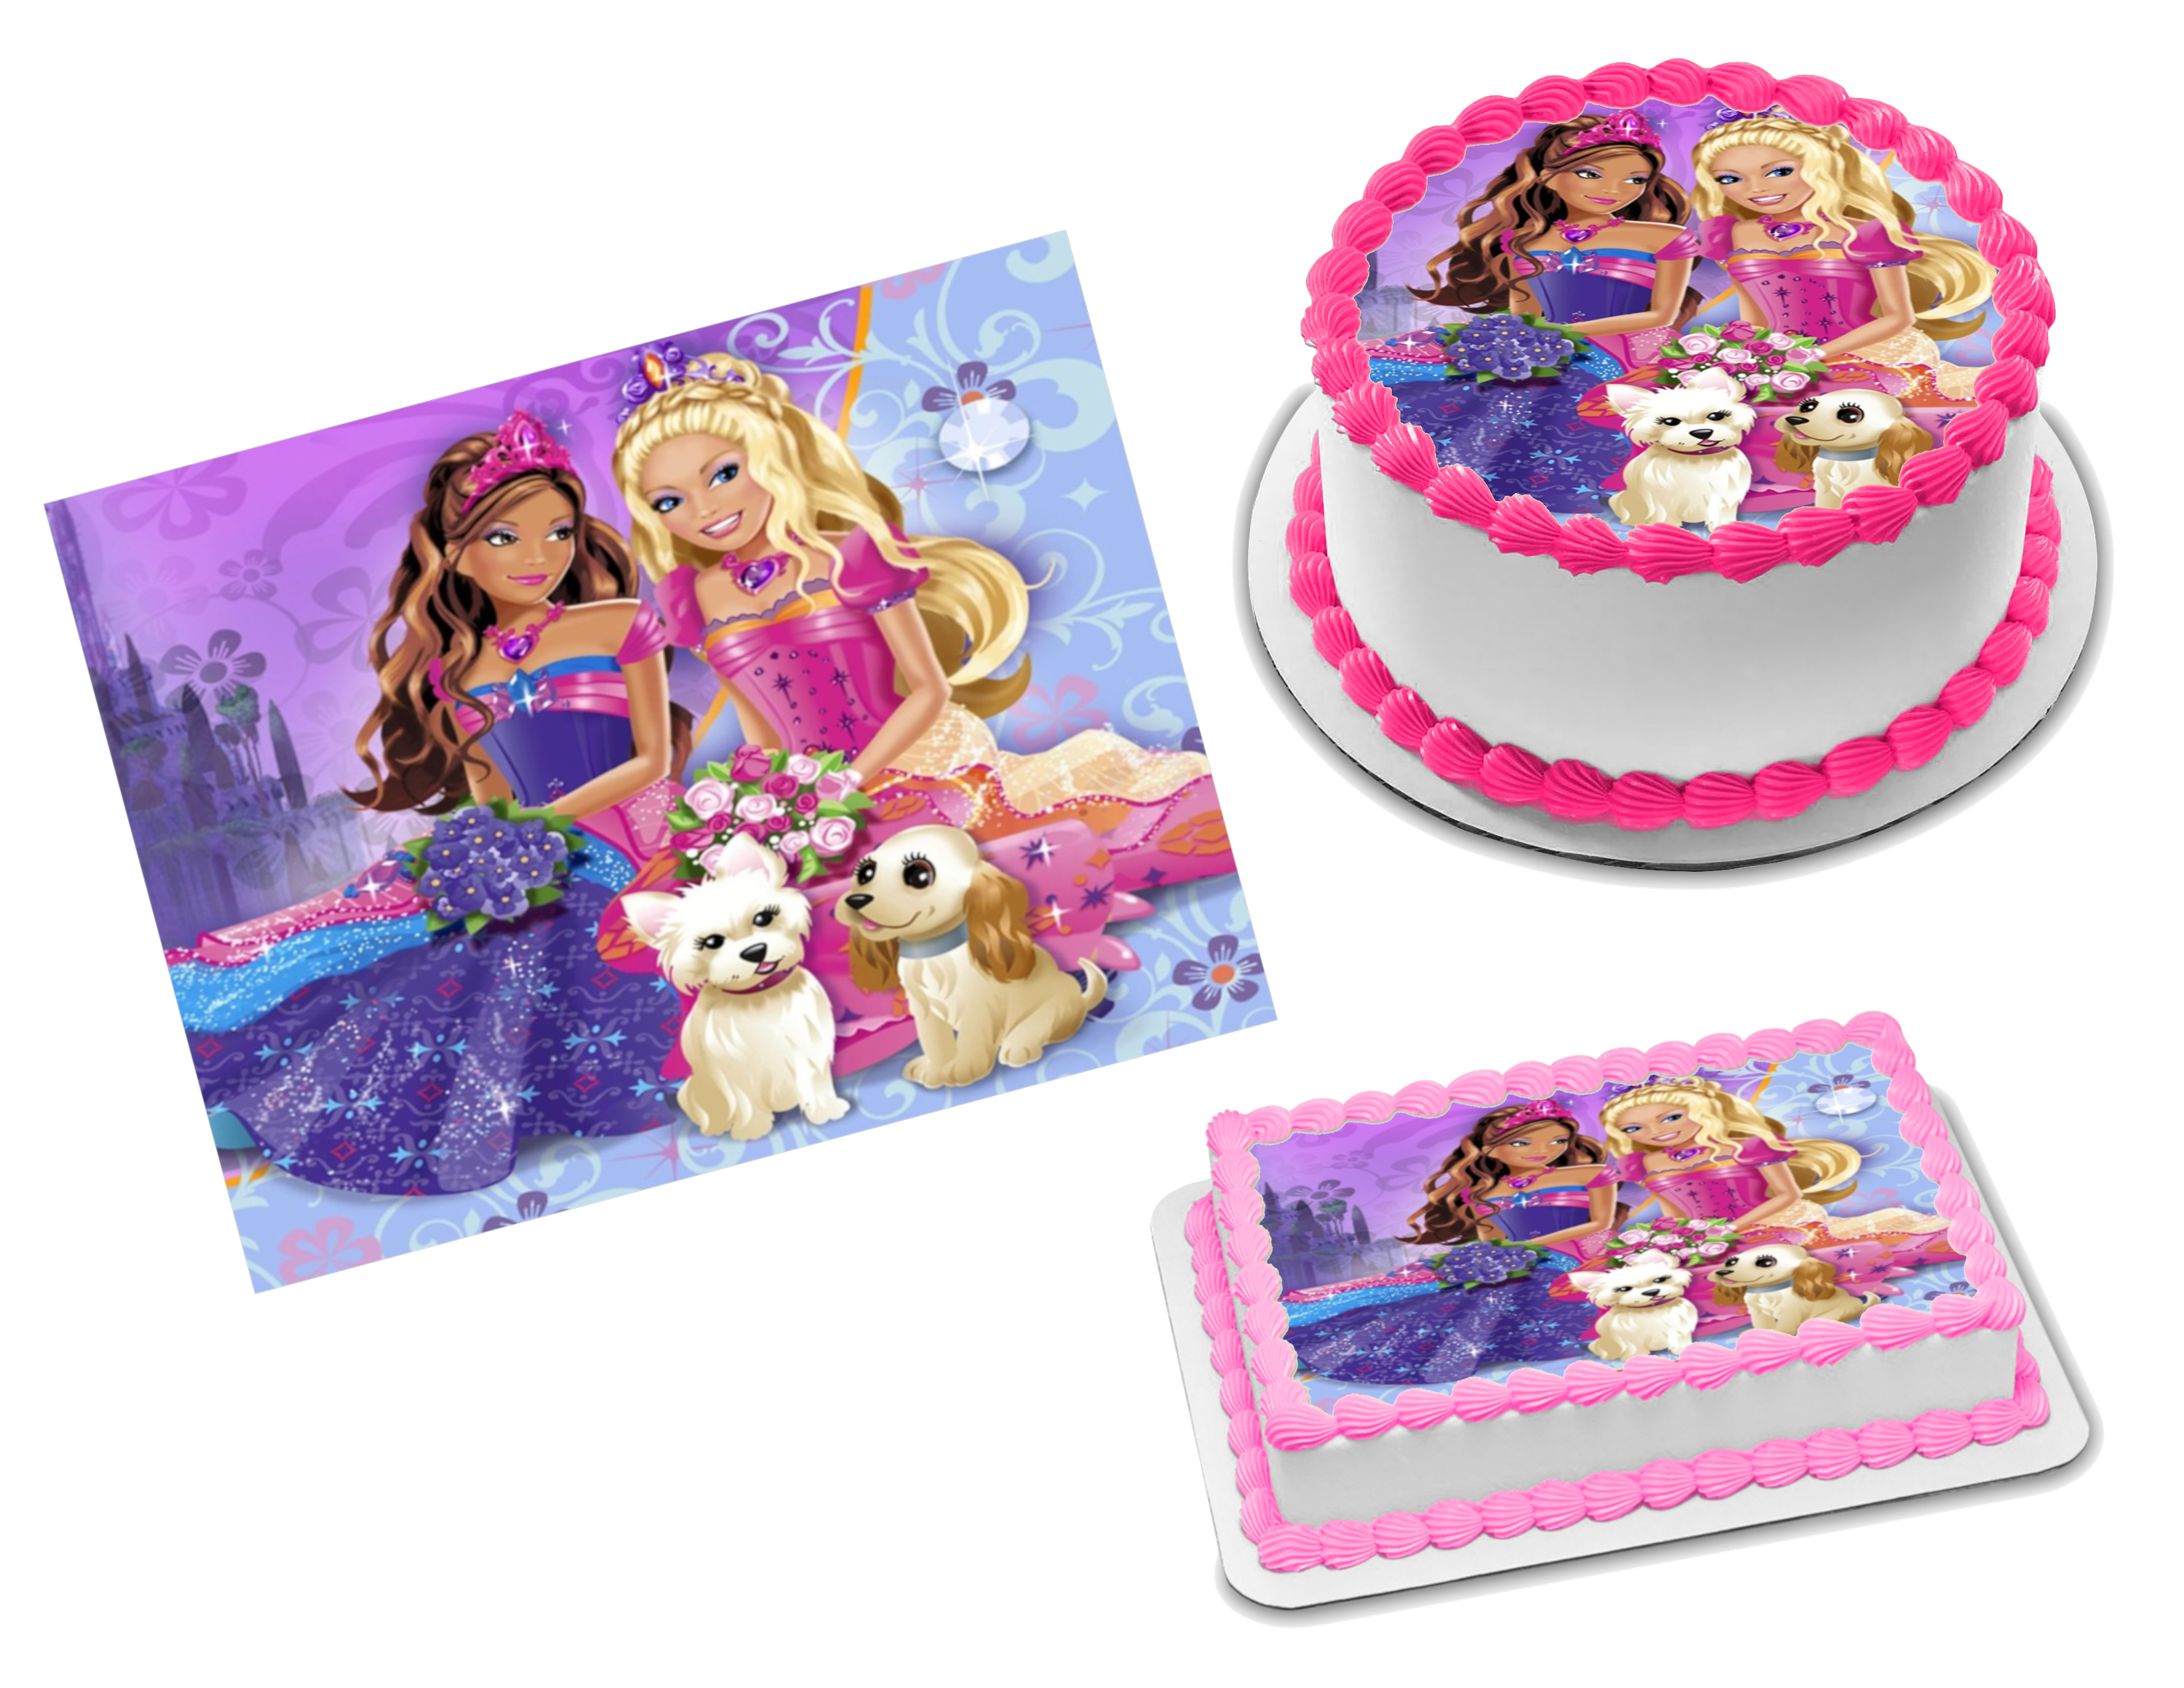 Barbie Birthday Cake Toppers Template | PosterMyWall